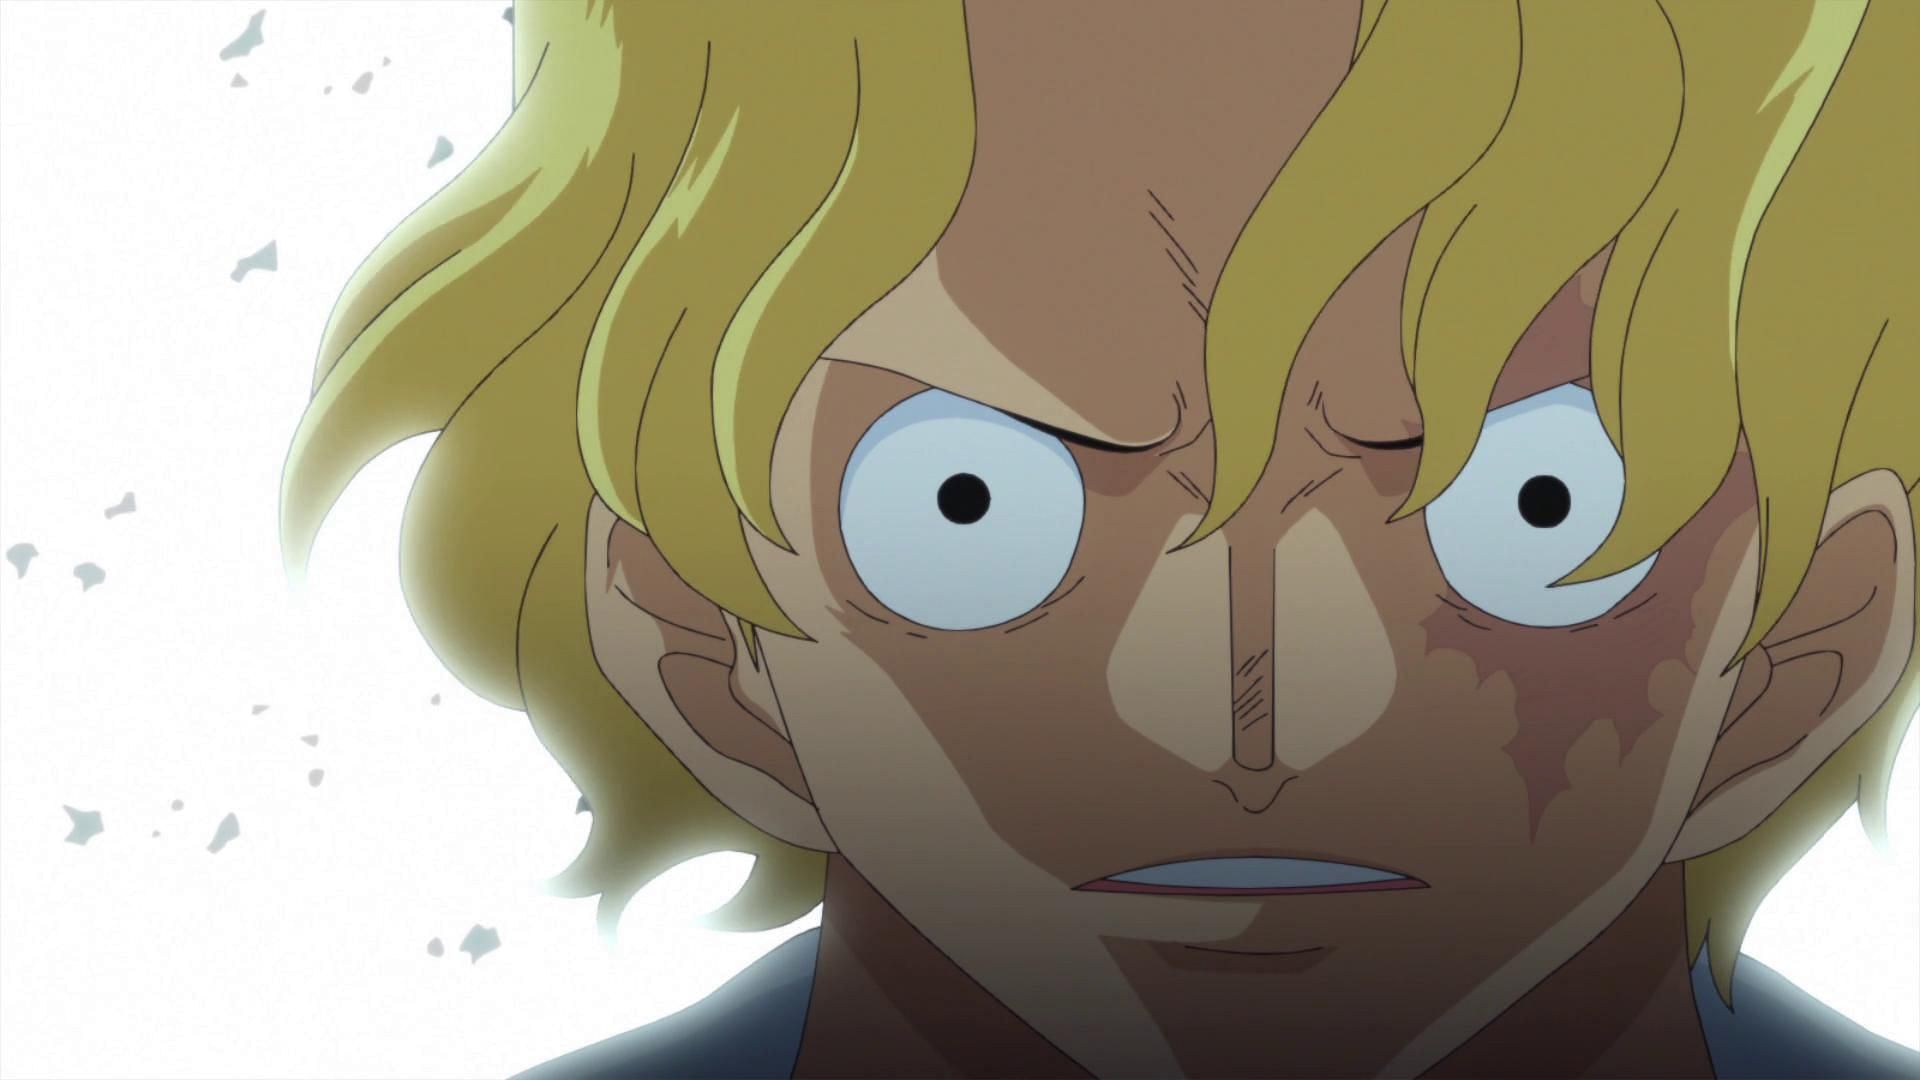 Sabo as seen in the series&#039; anime (Image via Toei Animation)